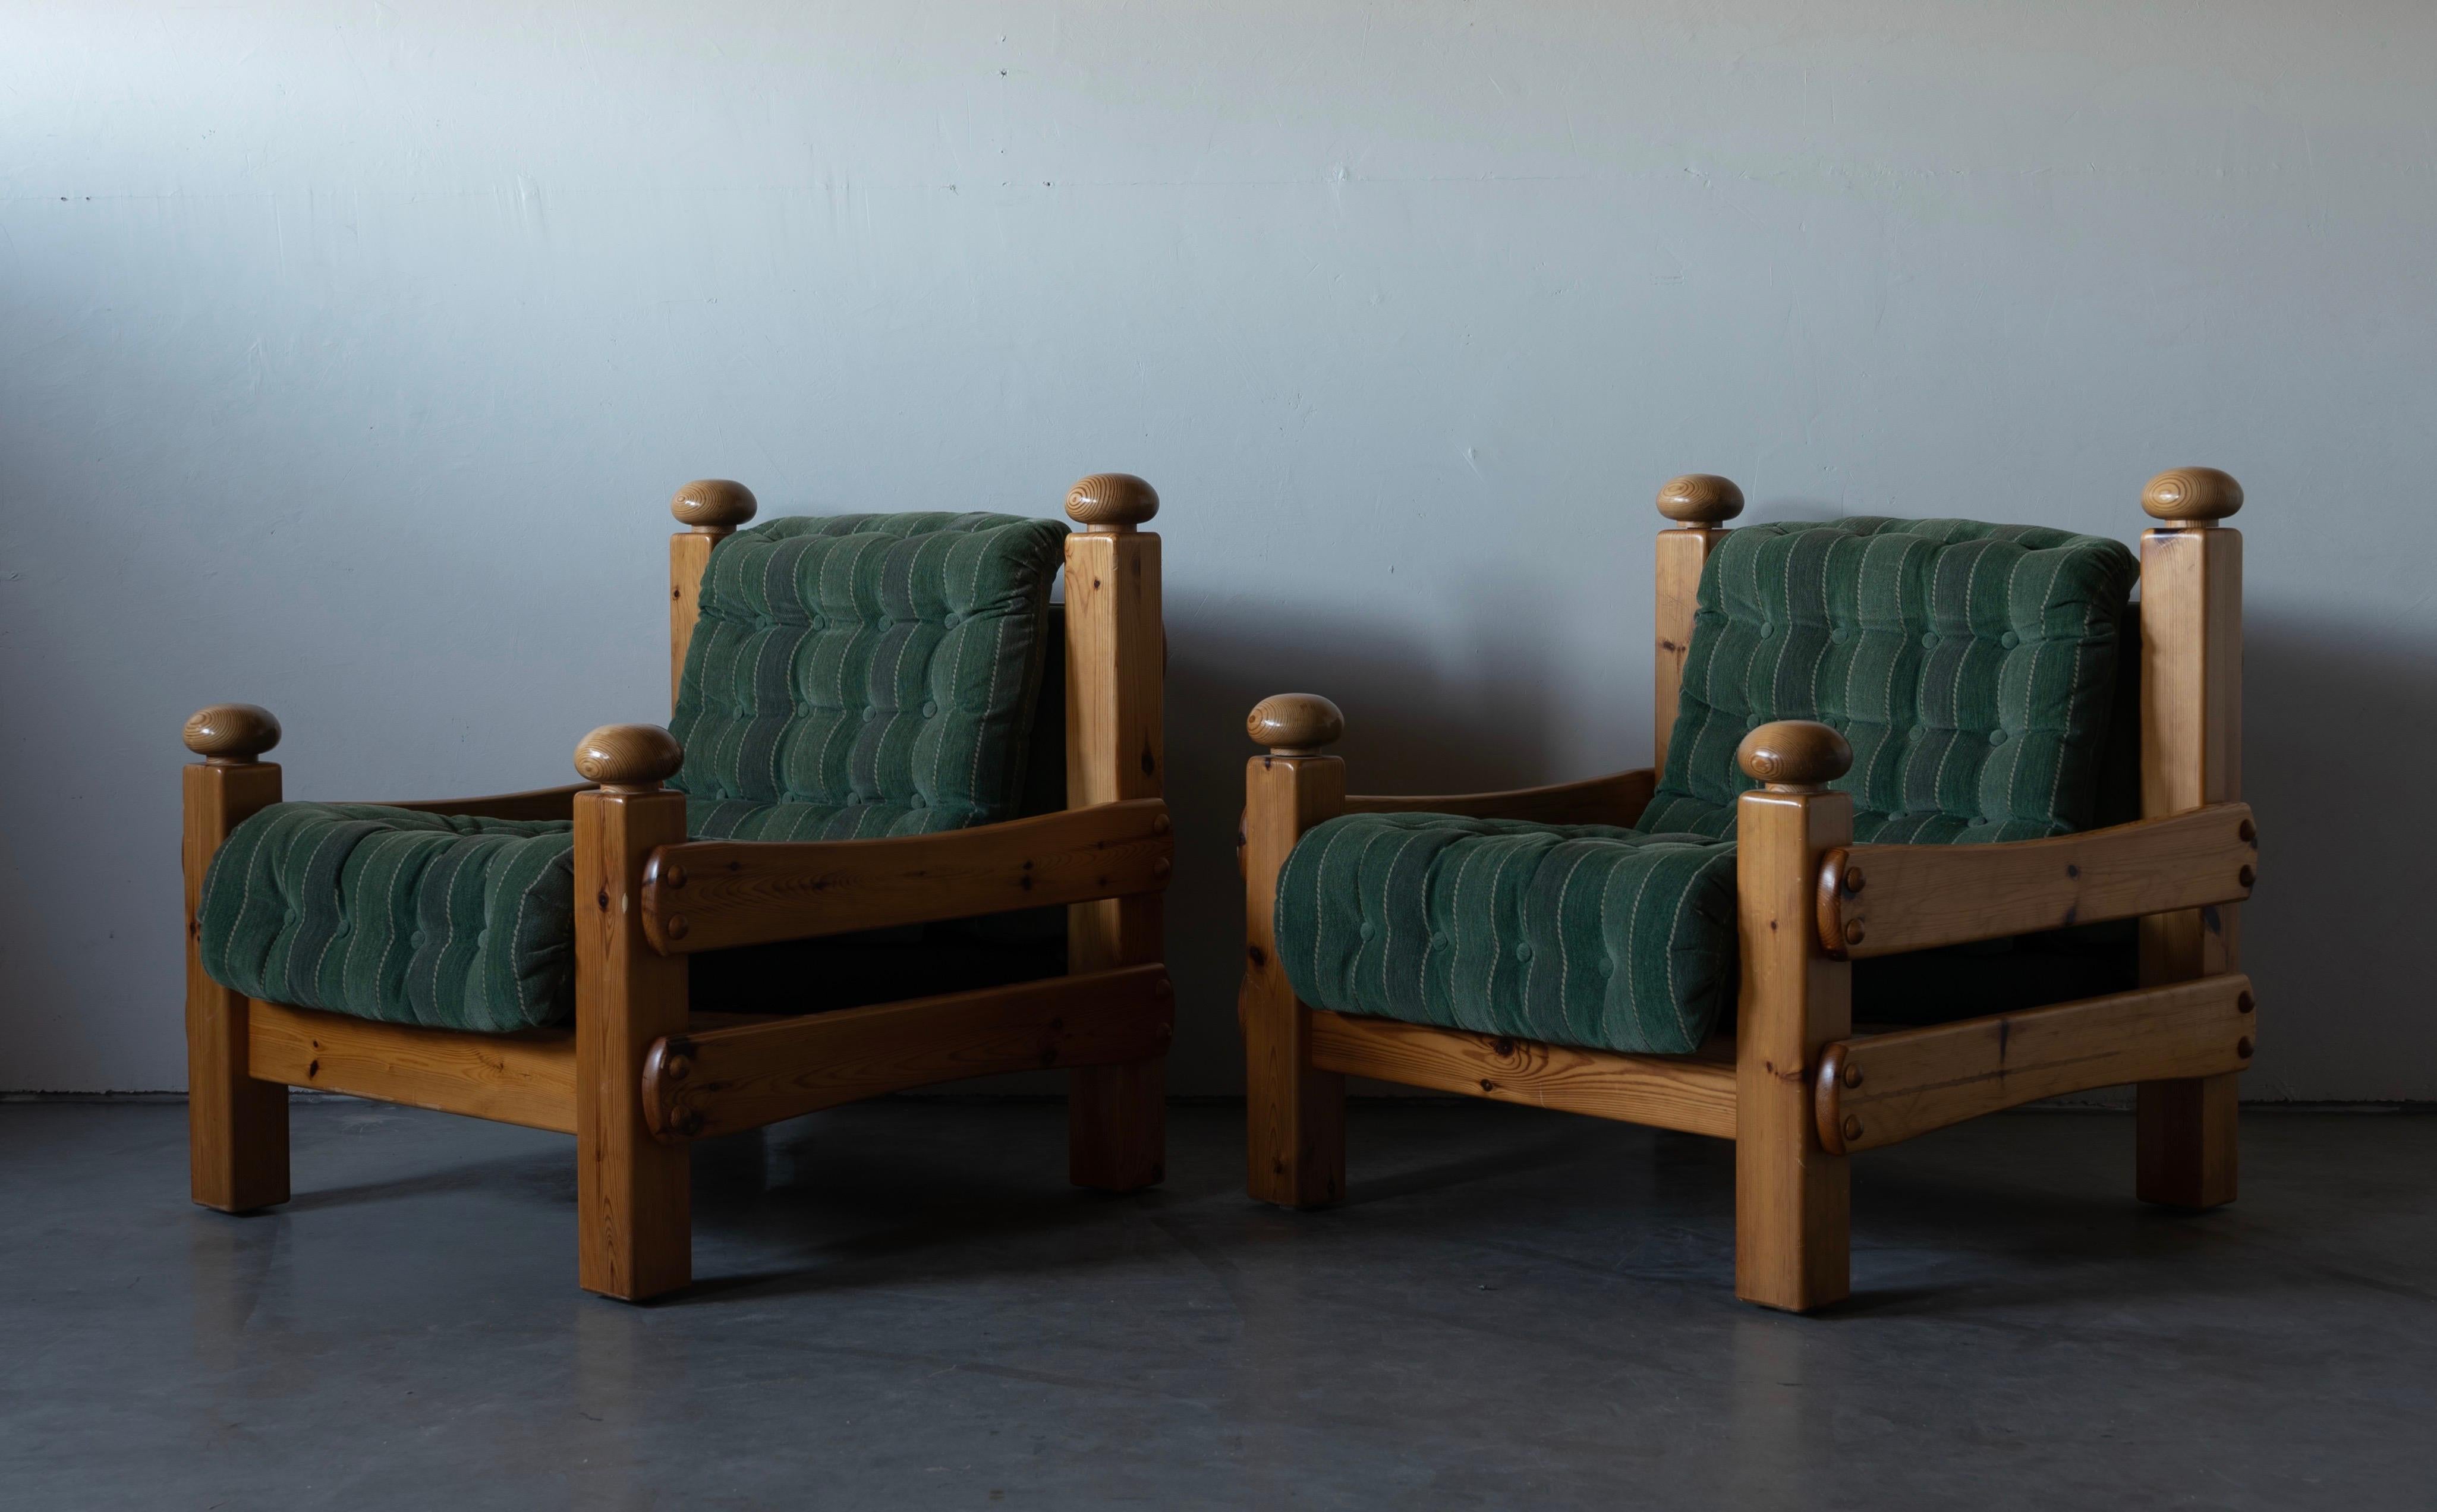 Danish Swedish Designer, Lounge Chairs, Solid Pine, Green Fabric, Sweden, 1970s For Sale